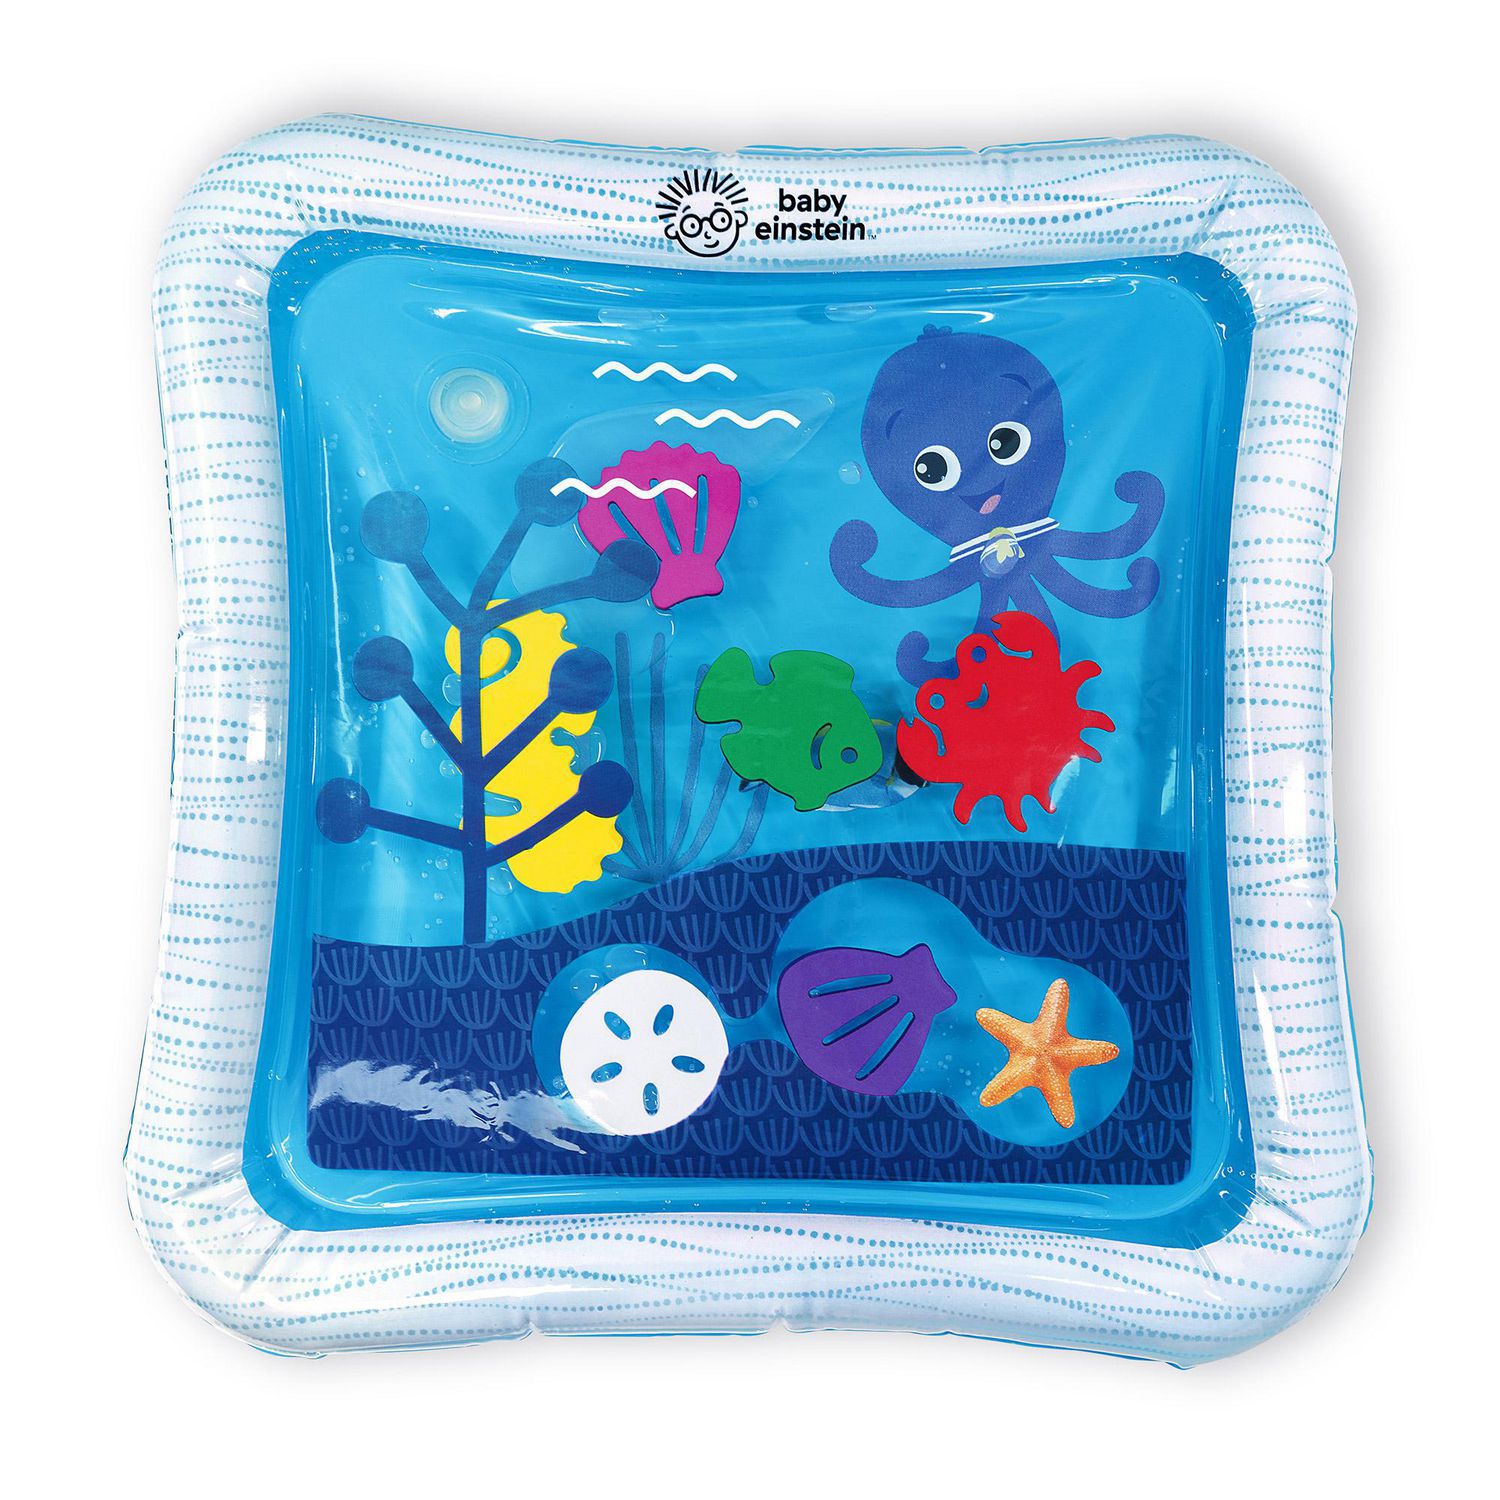 Live - Honest review of the Baby Einstein Sea Dreams